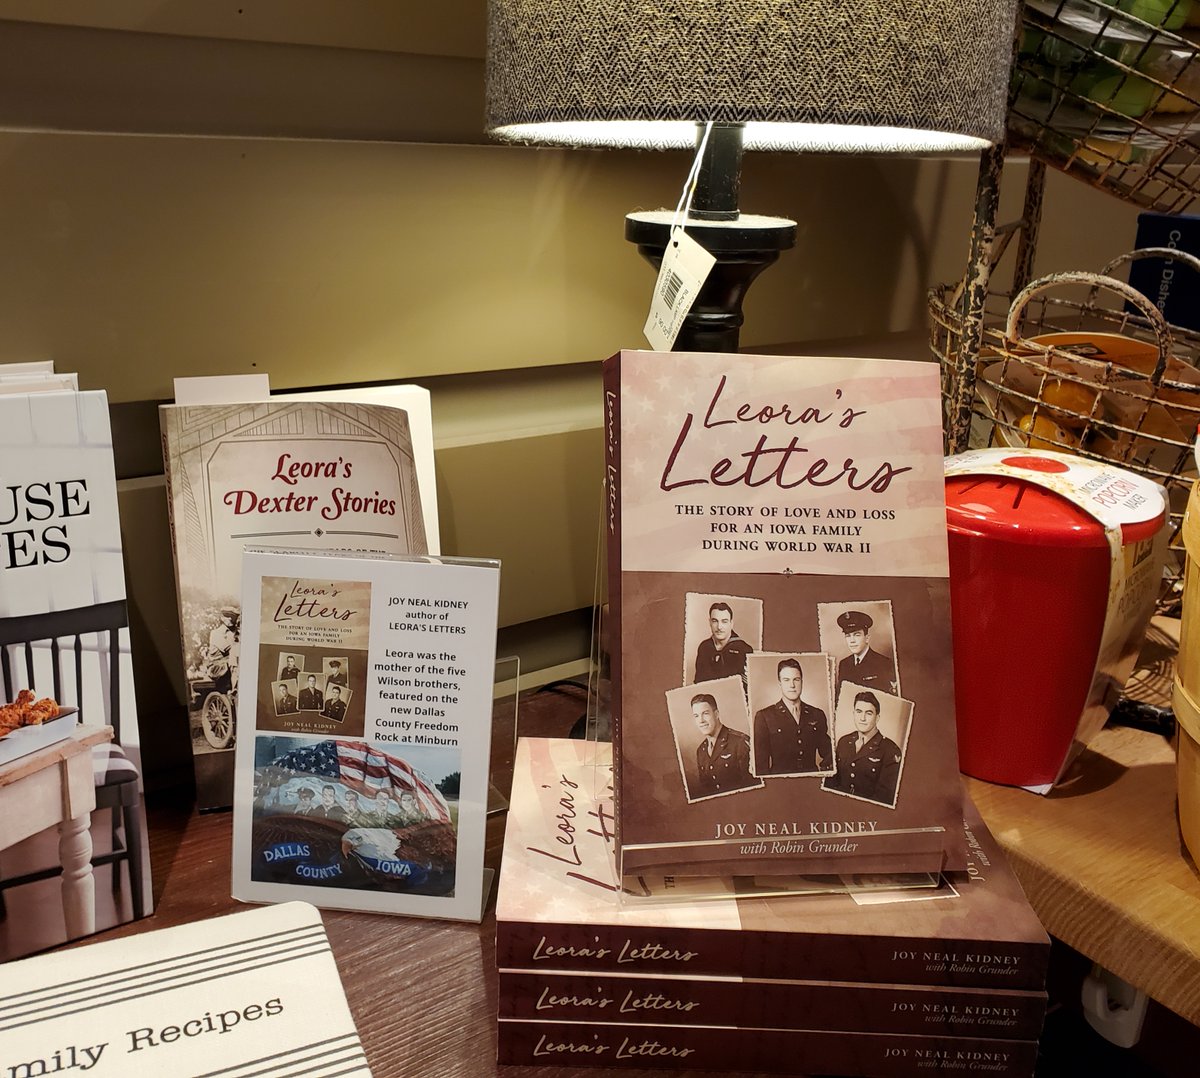 The Urbandale Machine Shed Restaurant just received a new batch of autographed 'Leora books.'

#grateful #UrbandaleMachineShedRestaurant #LeorasLetters #LeorasDexterStories #LeorasEarlyYears #fivebrothersservedonlytwocamehome